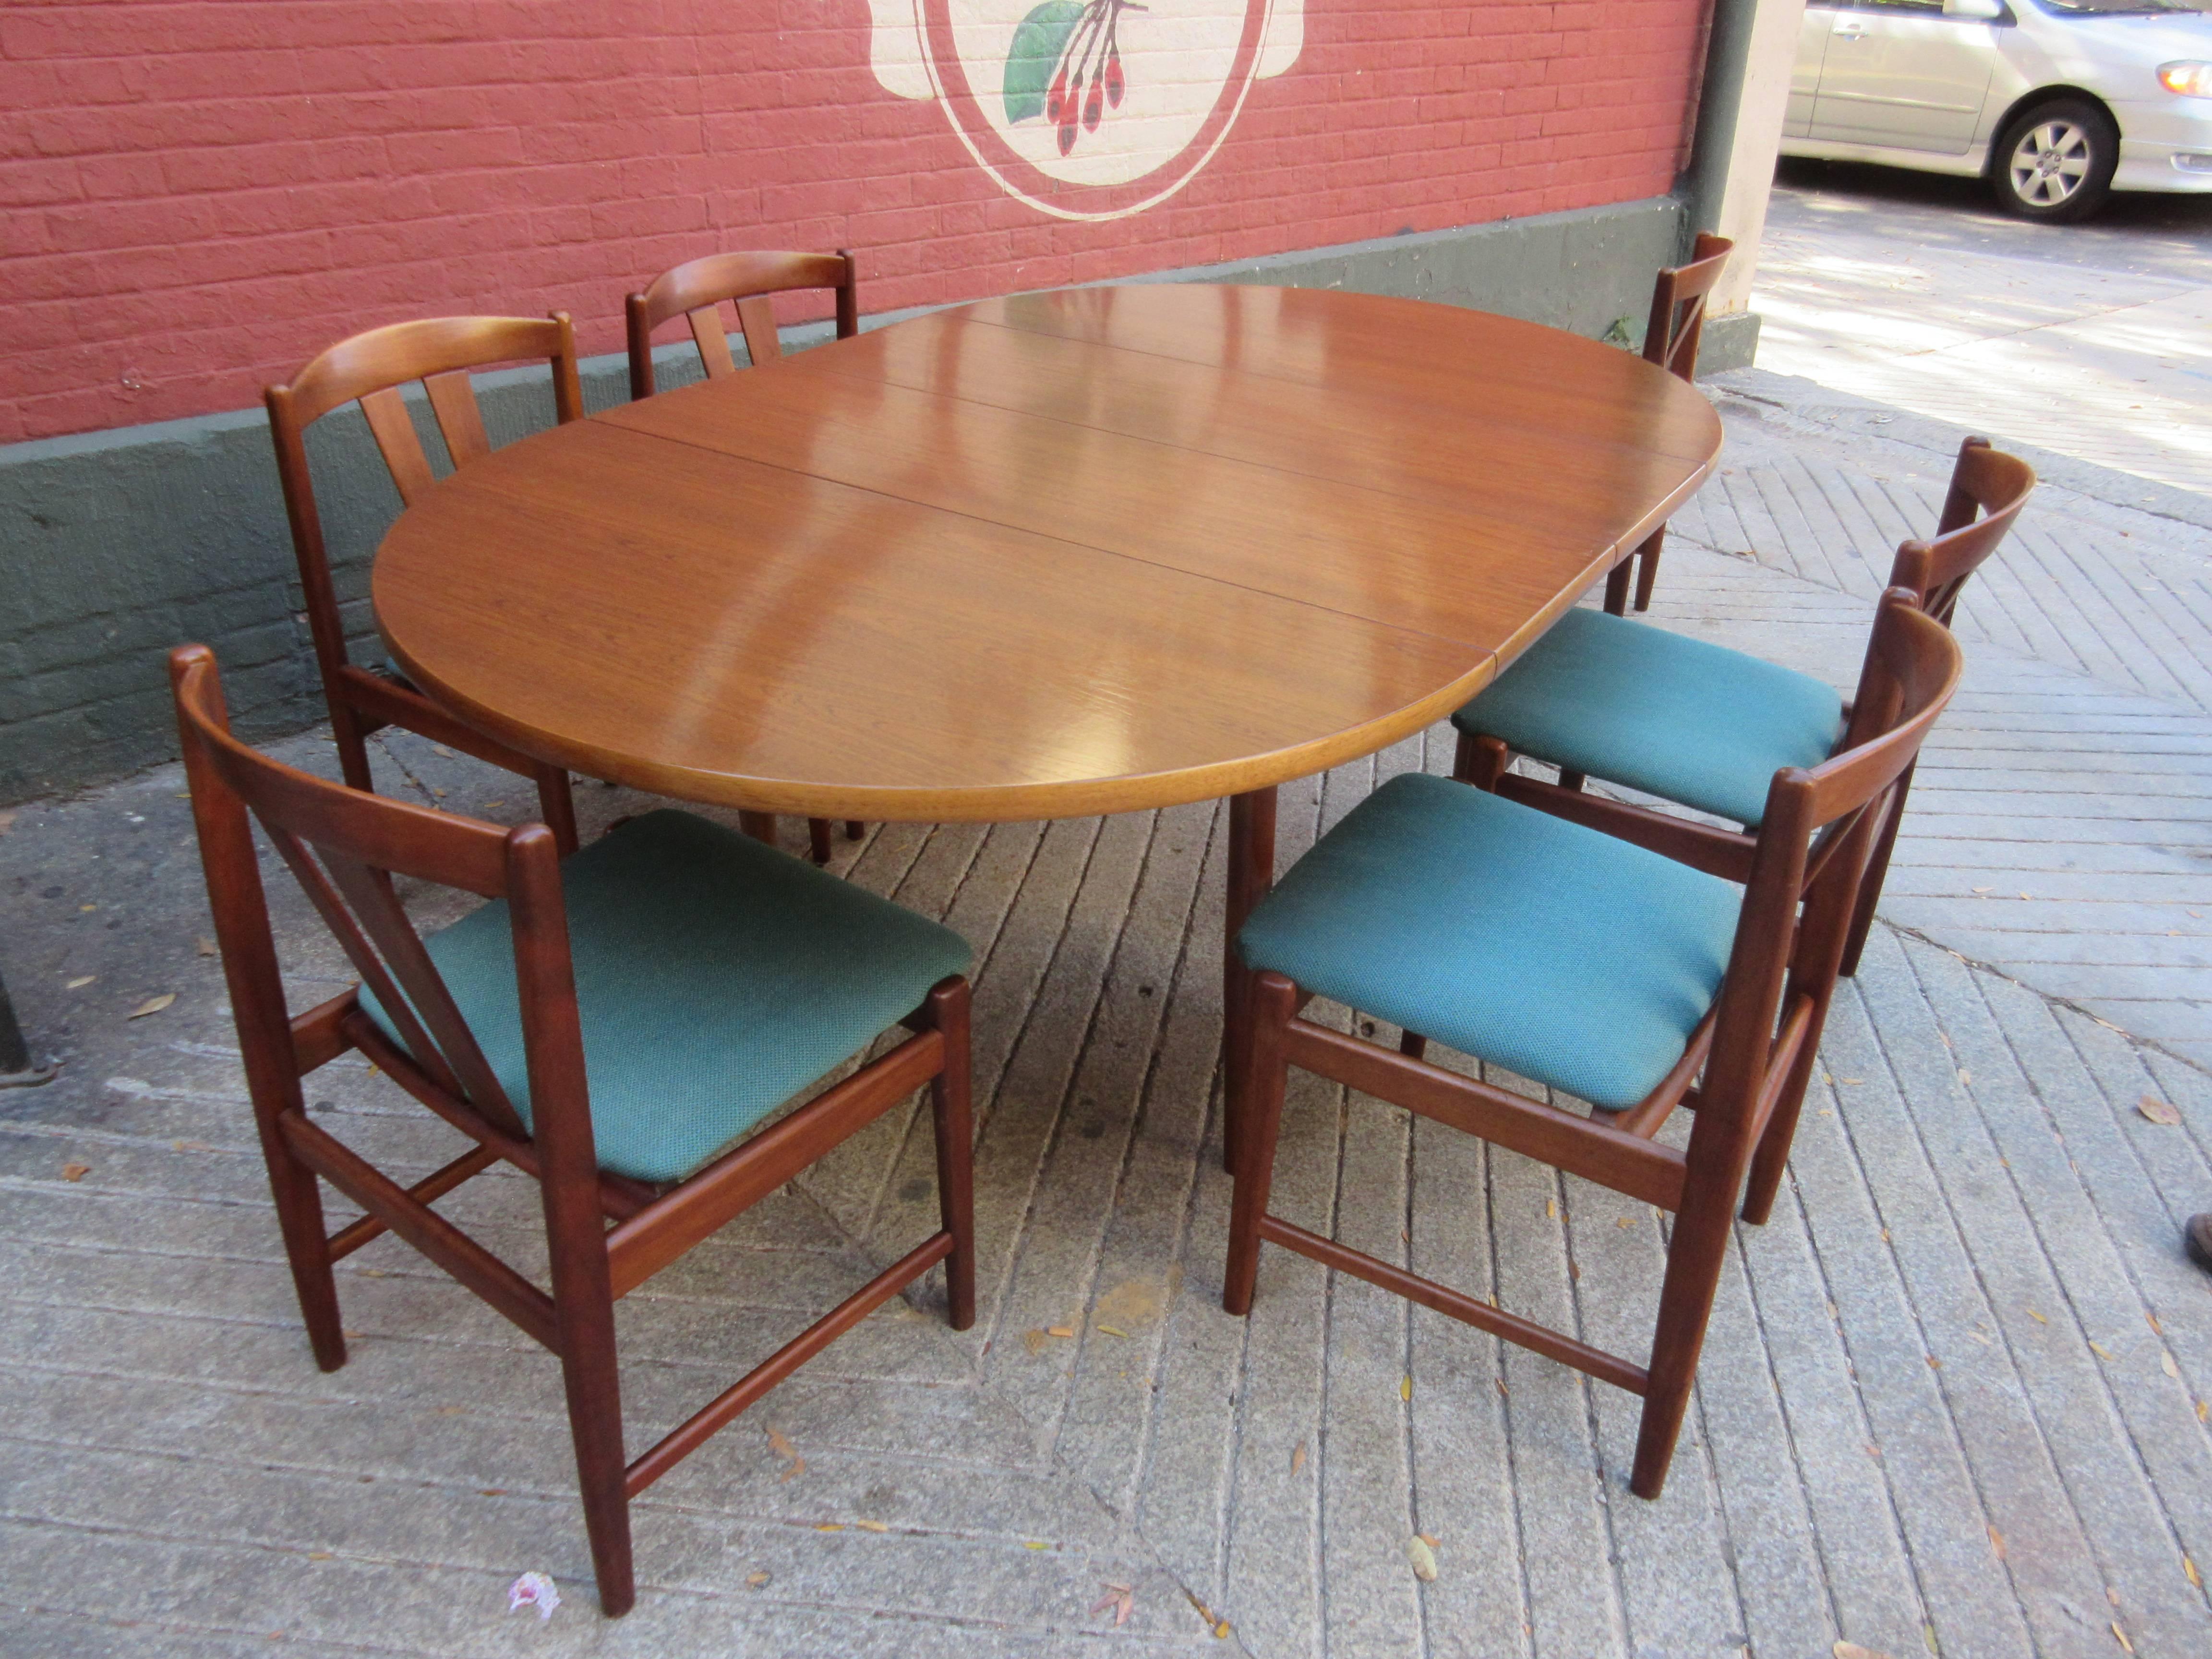 Teak table and chair set with labels on chairs and burnt brand on table. Round table extends to oval with two leaves. Original blue fabric lightly soiled and faded. 45 inches round with two 13 inch leafs making a 71 oval table. Chairs are 30.5